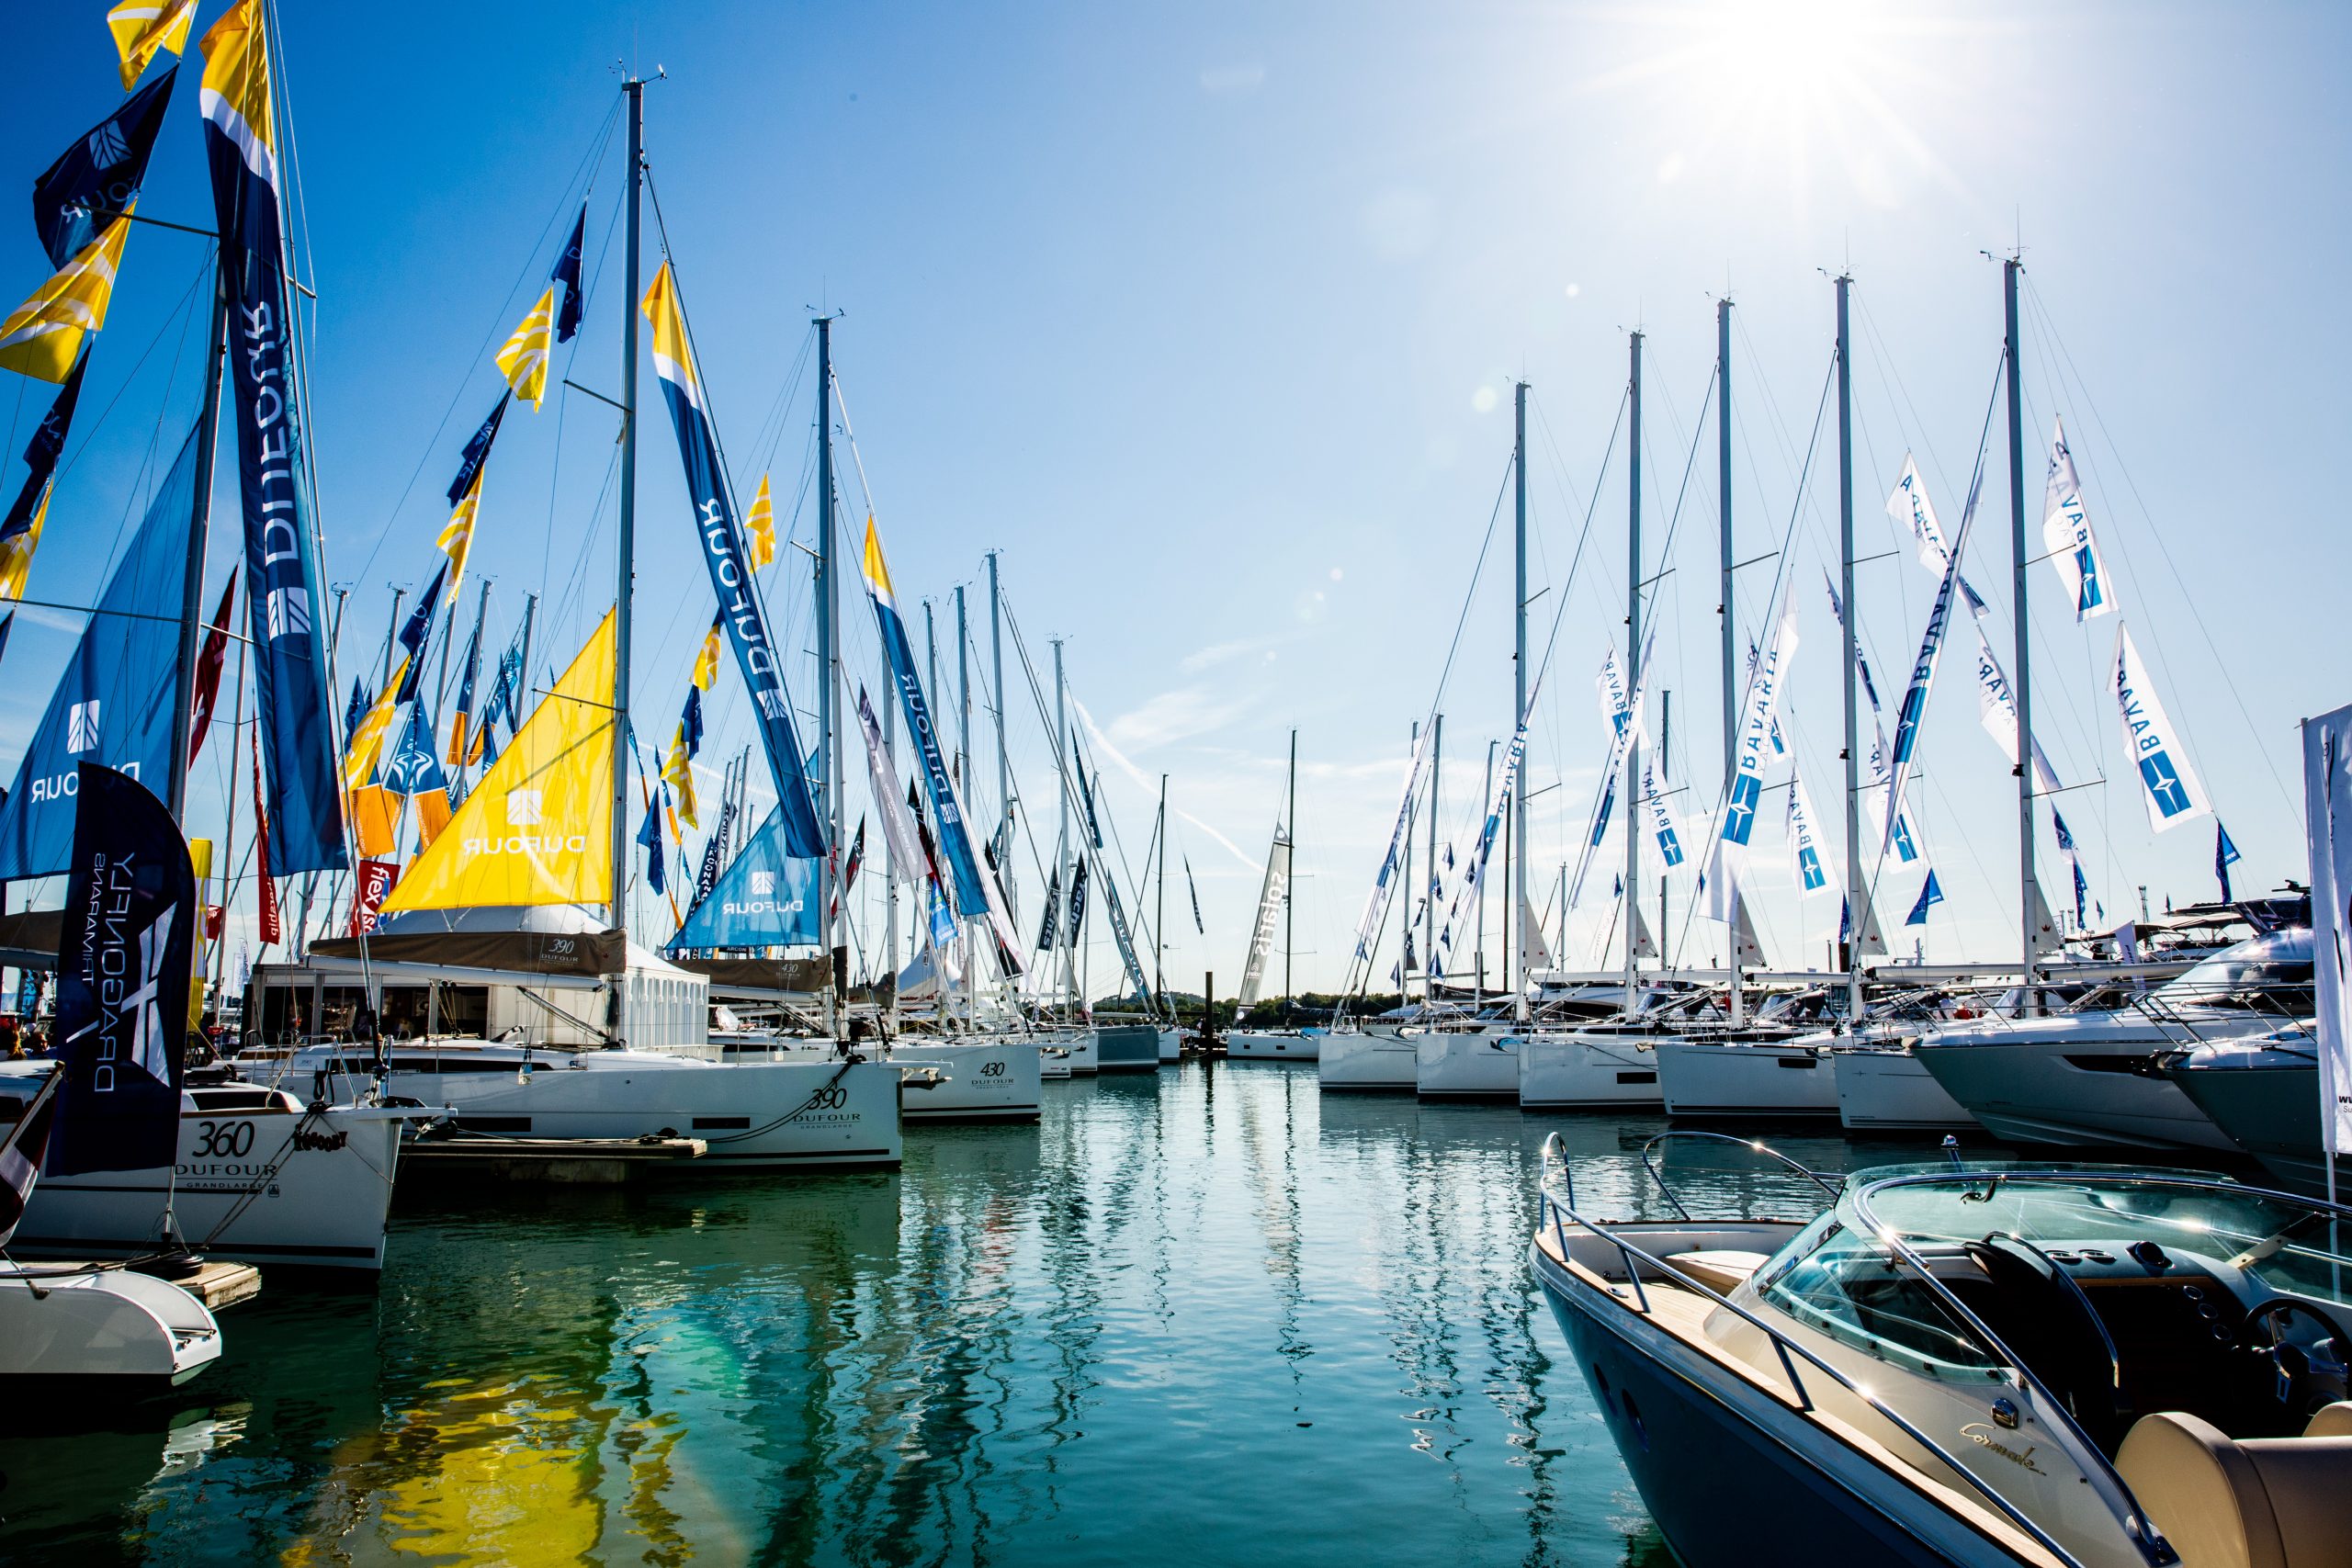 Stunning new boats and onshore line-up confirmed as pre-booked tickets go on sale for BOATS2020, 11-20 September 2020